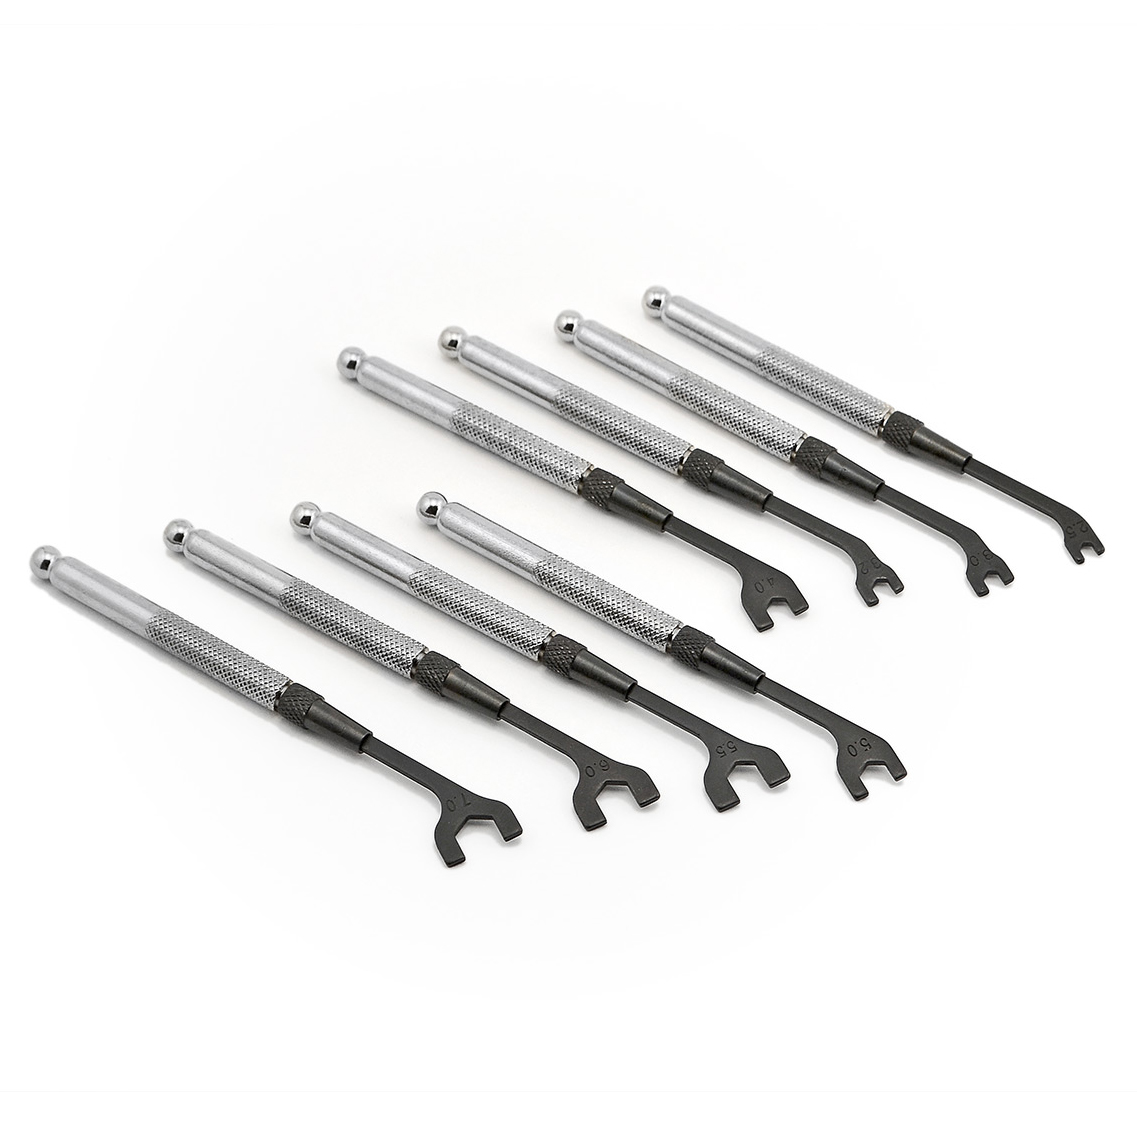 8-piece Open Ended Wrench Metric Se